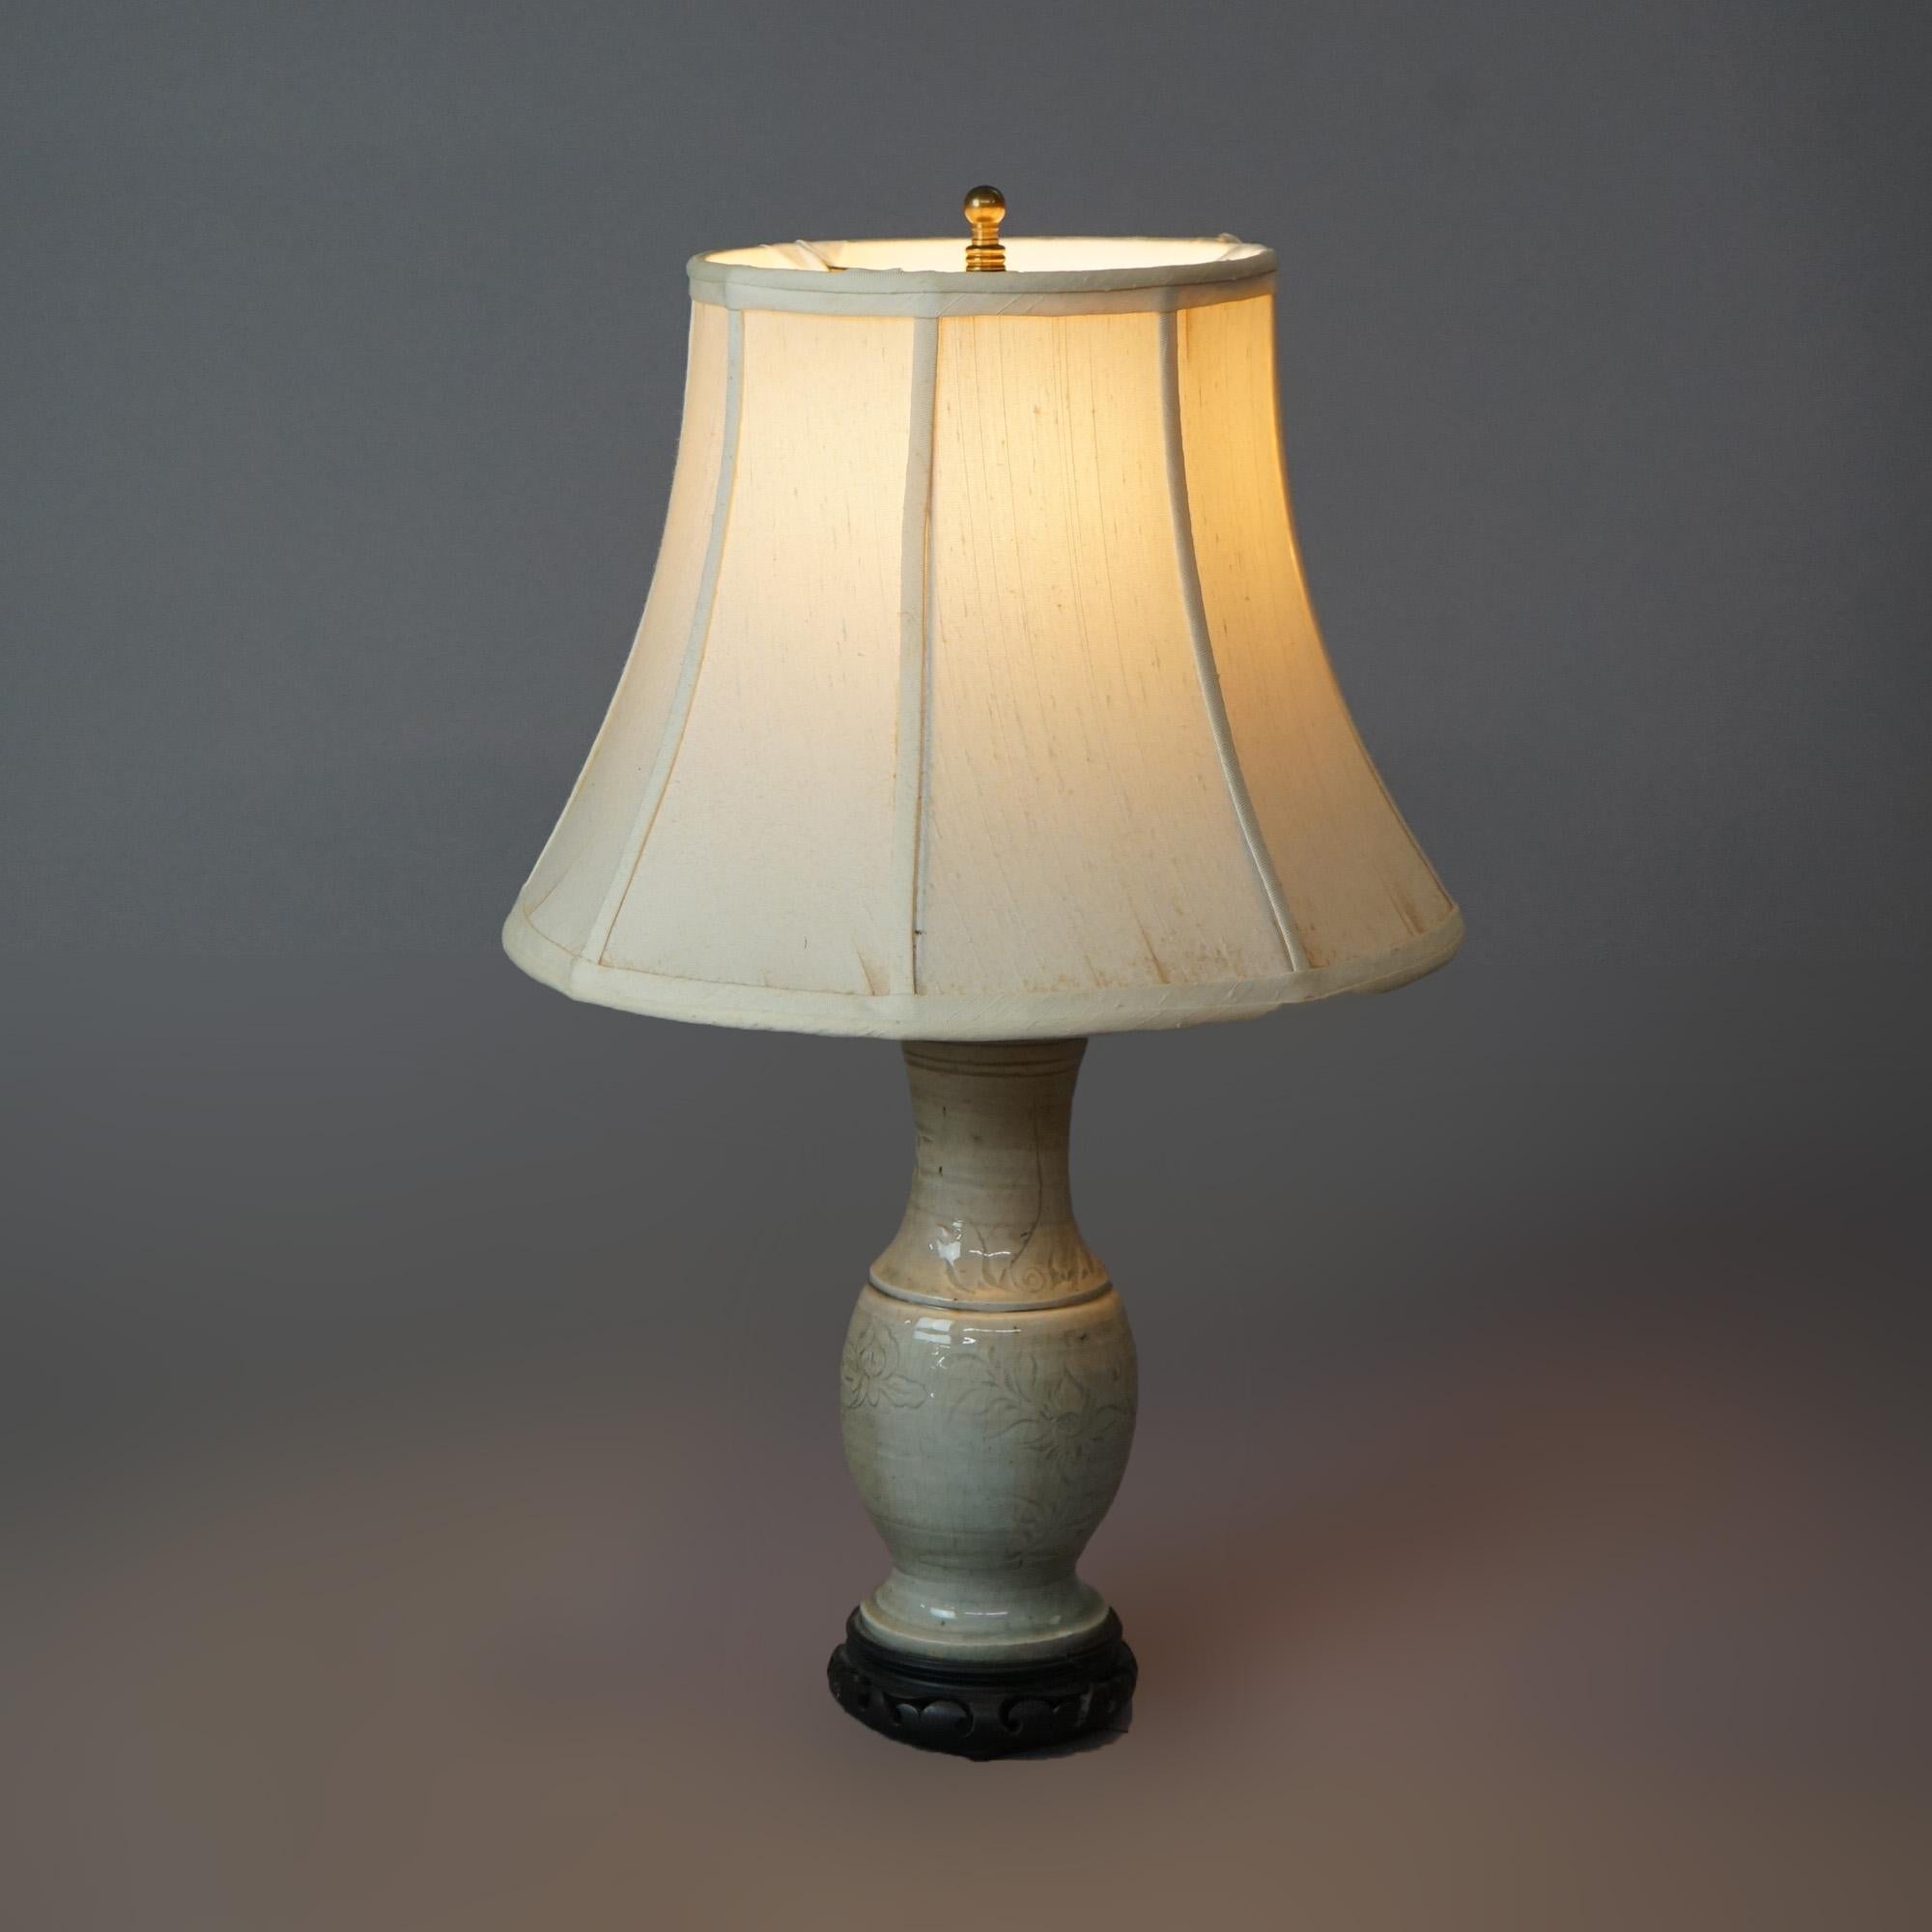 Antique Chinese Celadon Glazed Foliate Incised Art Pottery Table Lamp C1930 5